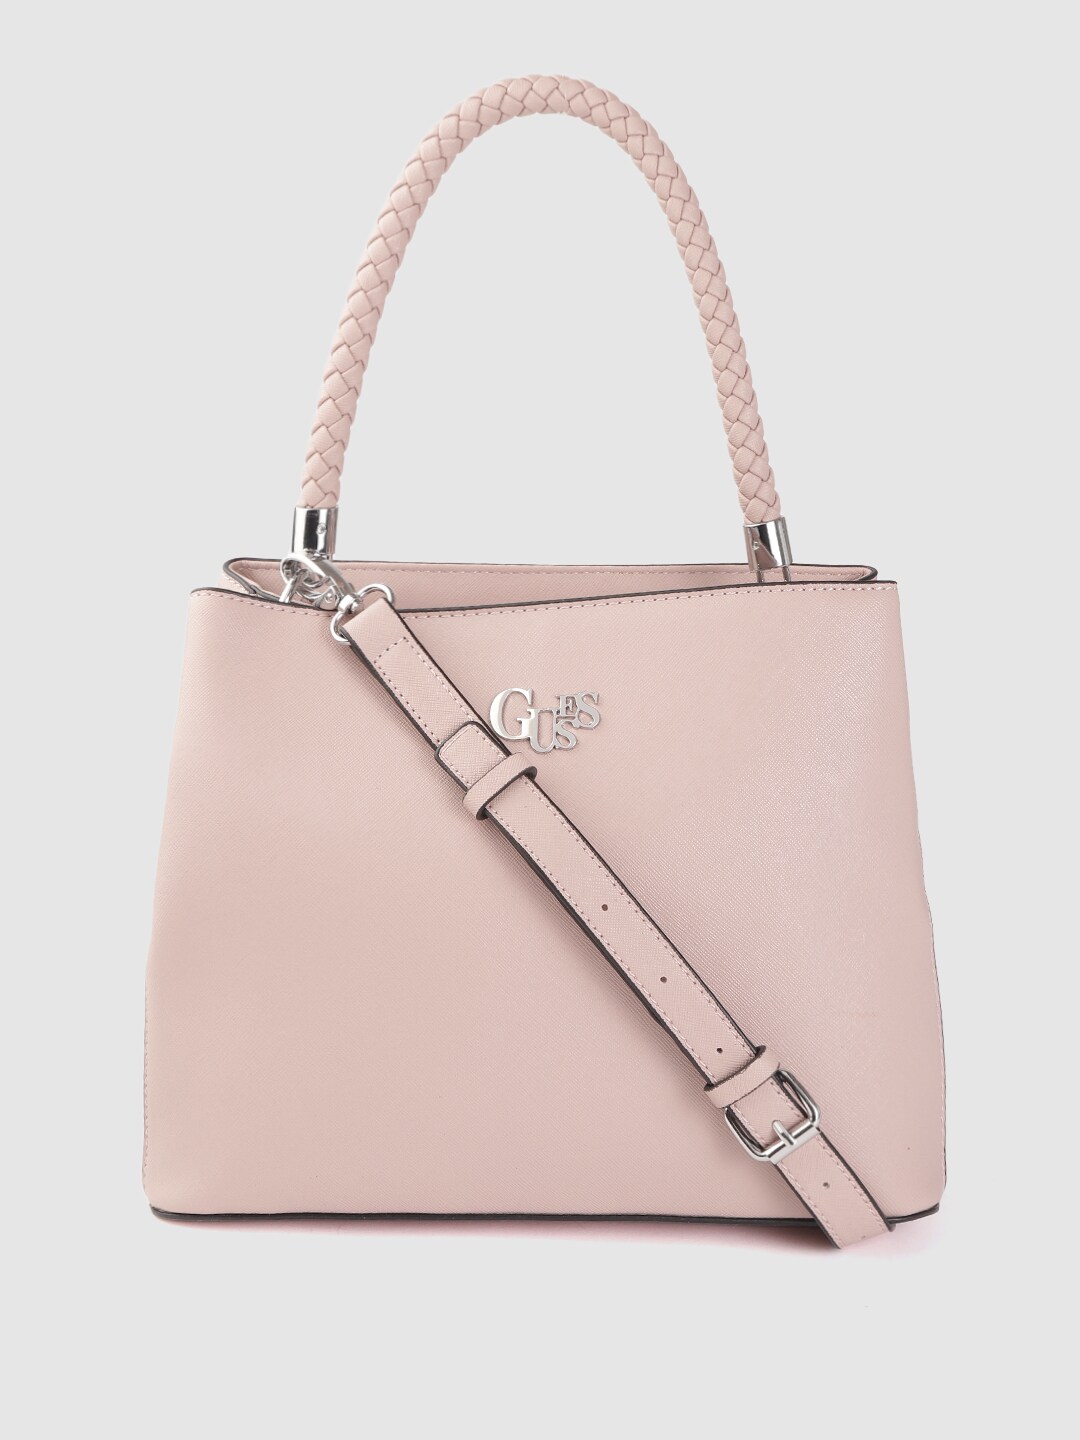 GUESS Pink Solid Structured Handheld Bag Price in India